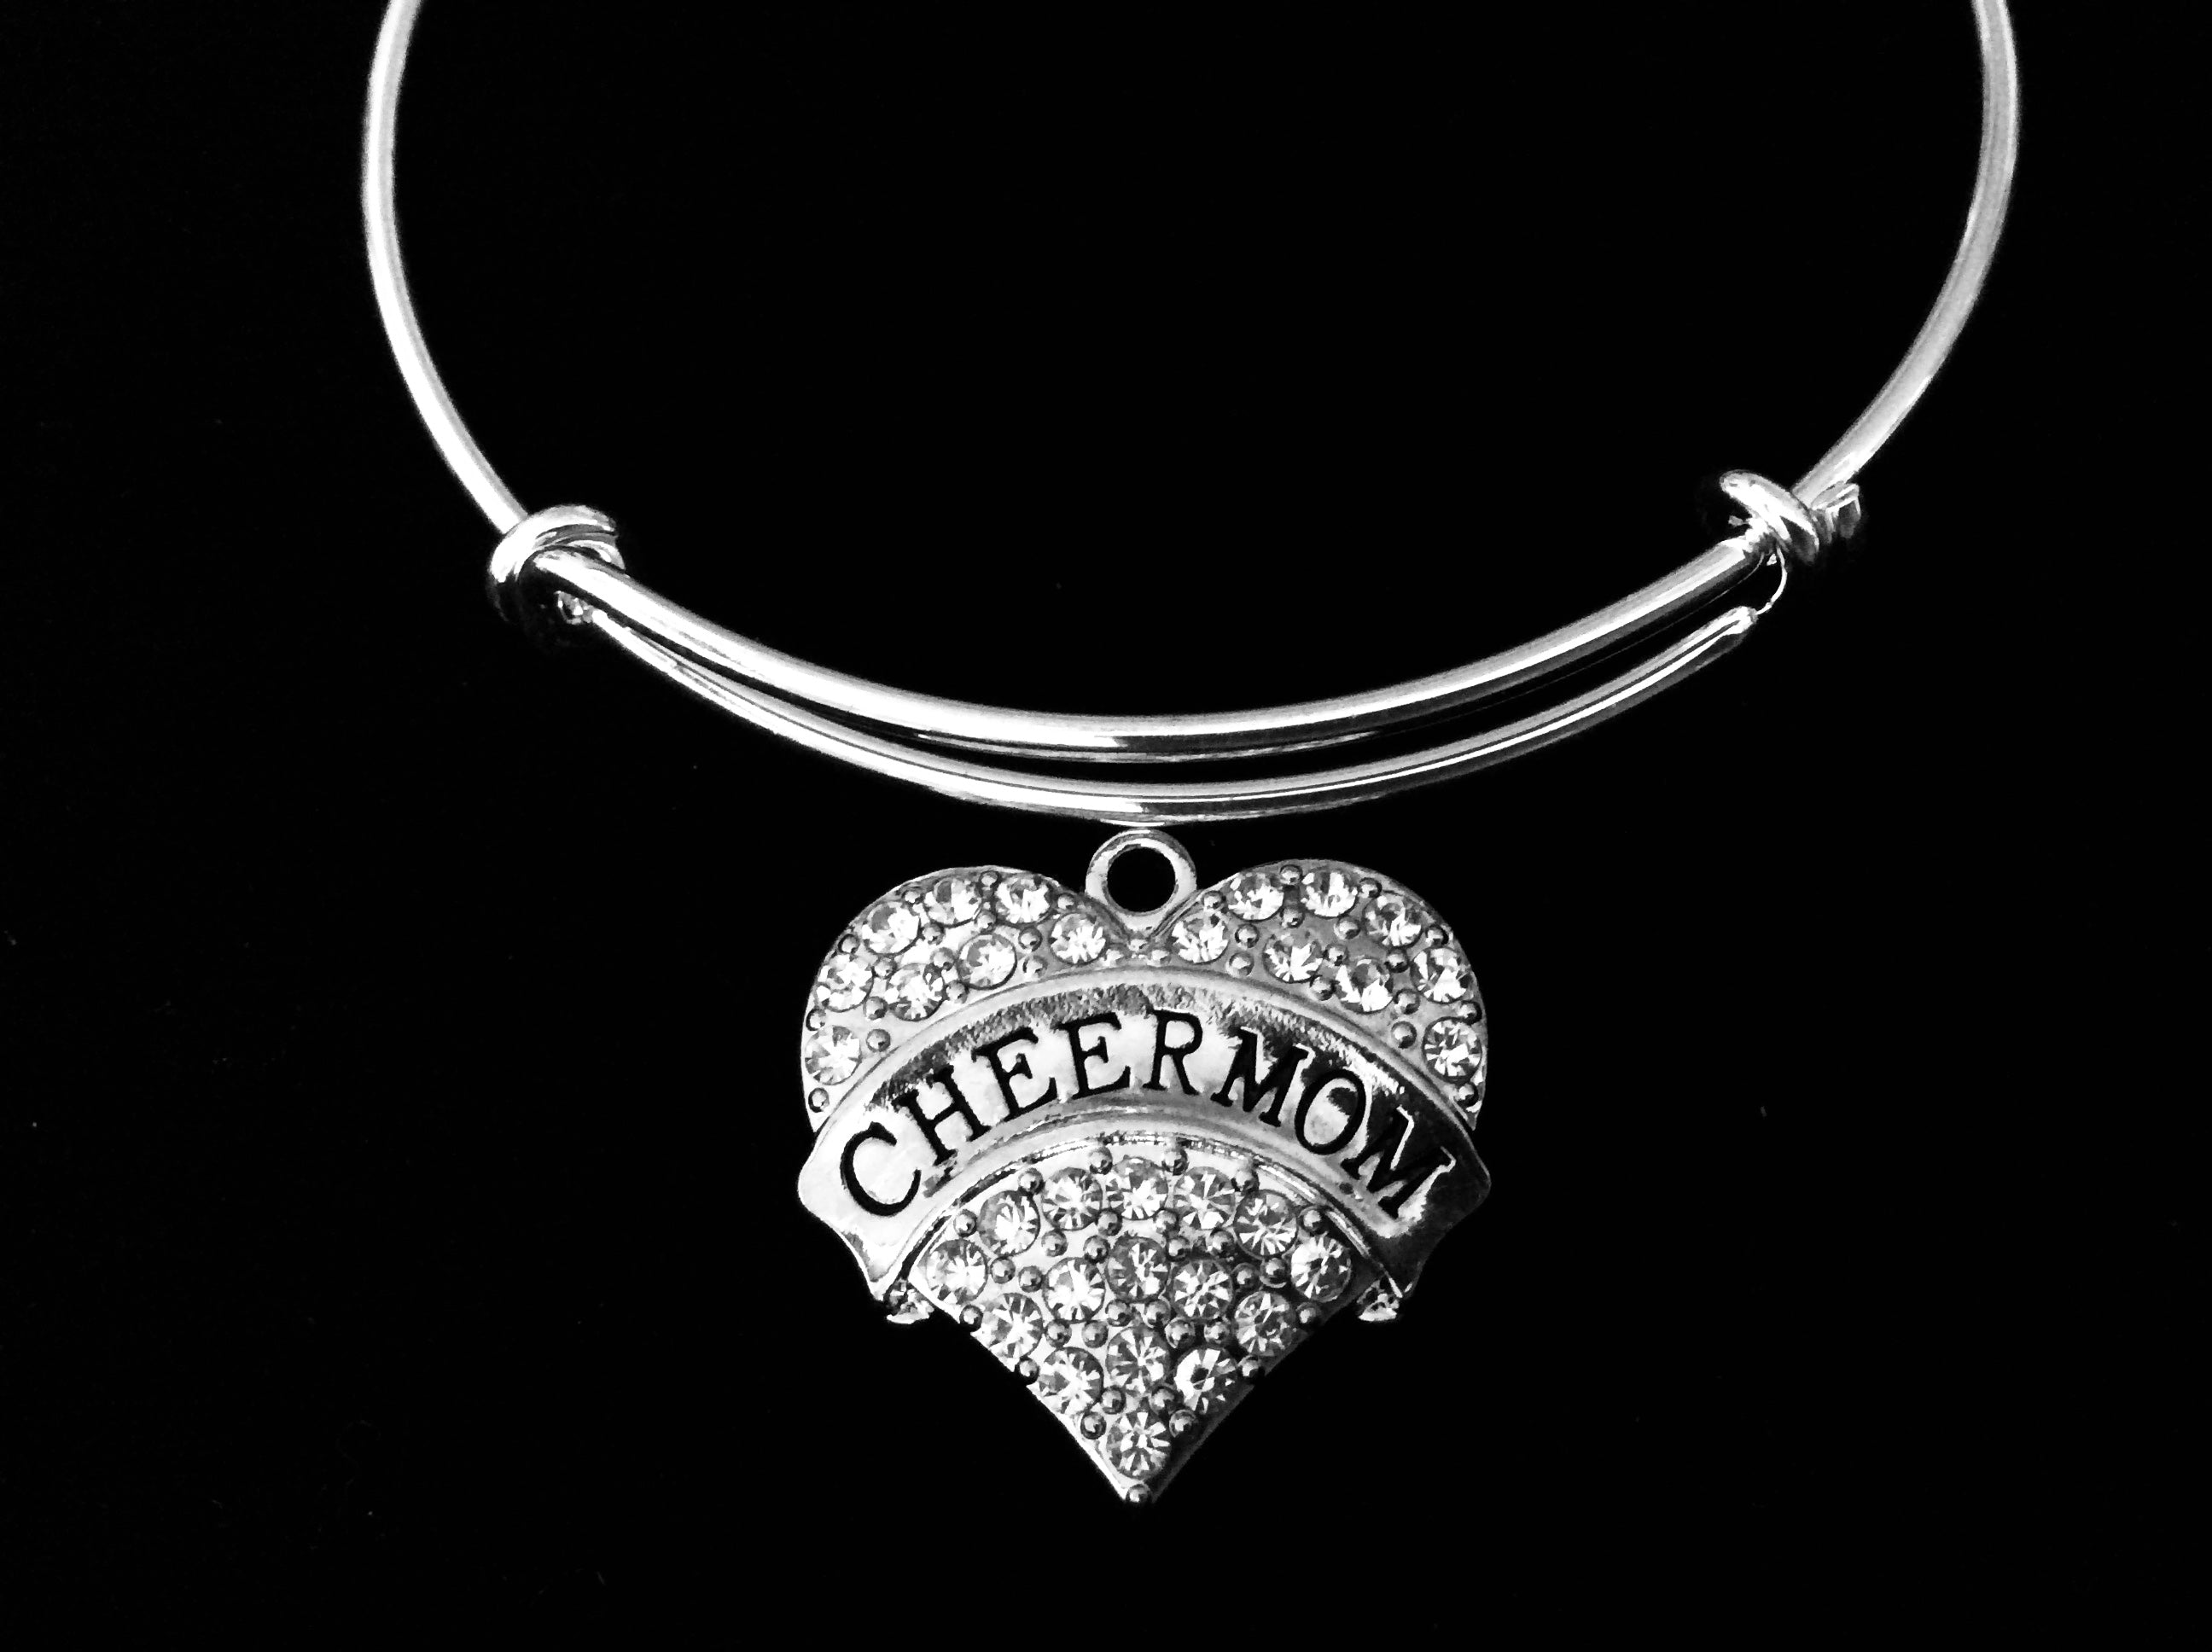 Cheer Mom Jewelry Adjustable Bracelet Expandable Silver Charm Wi